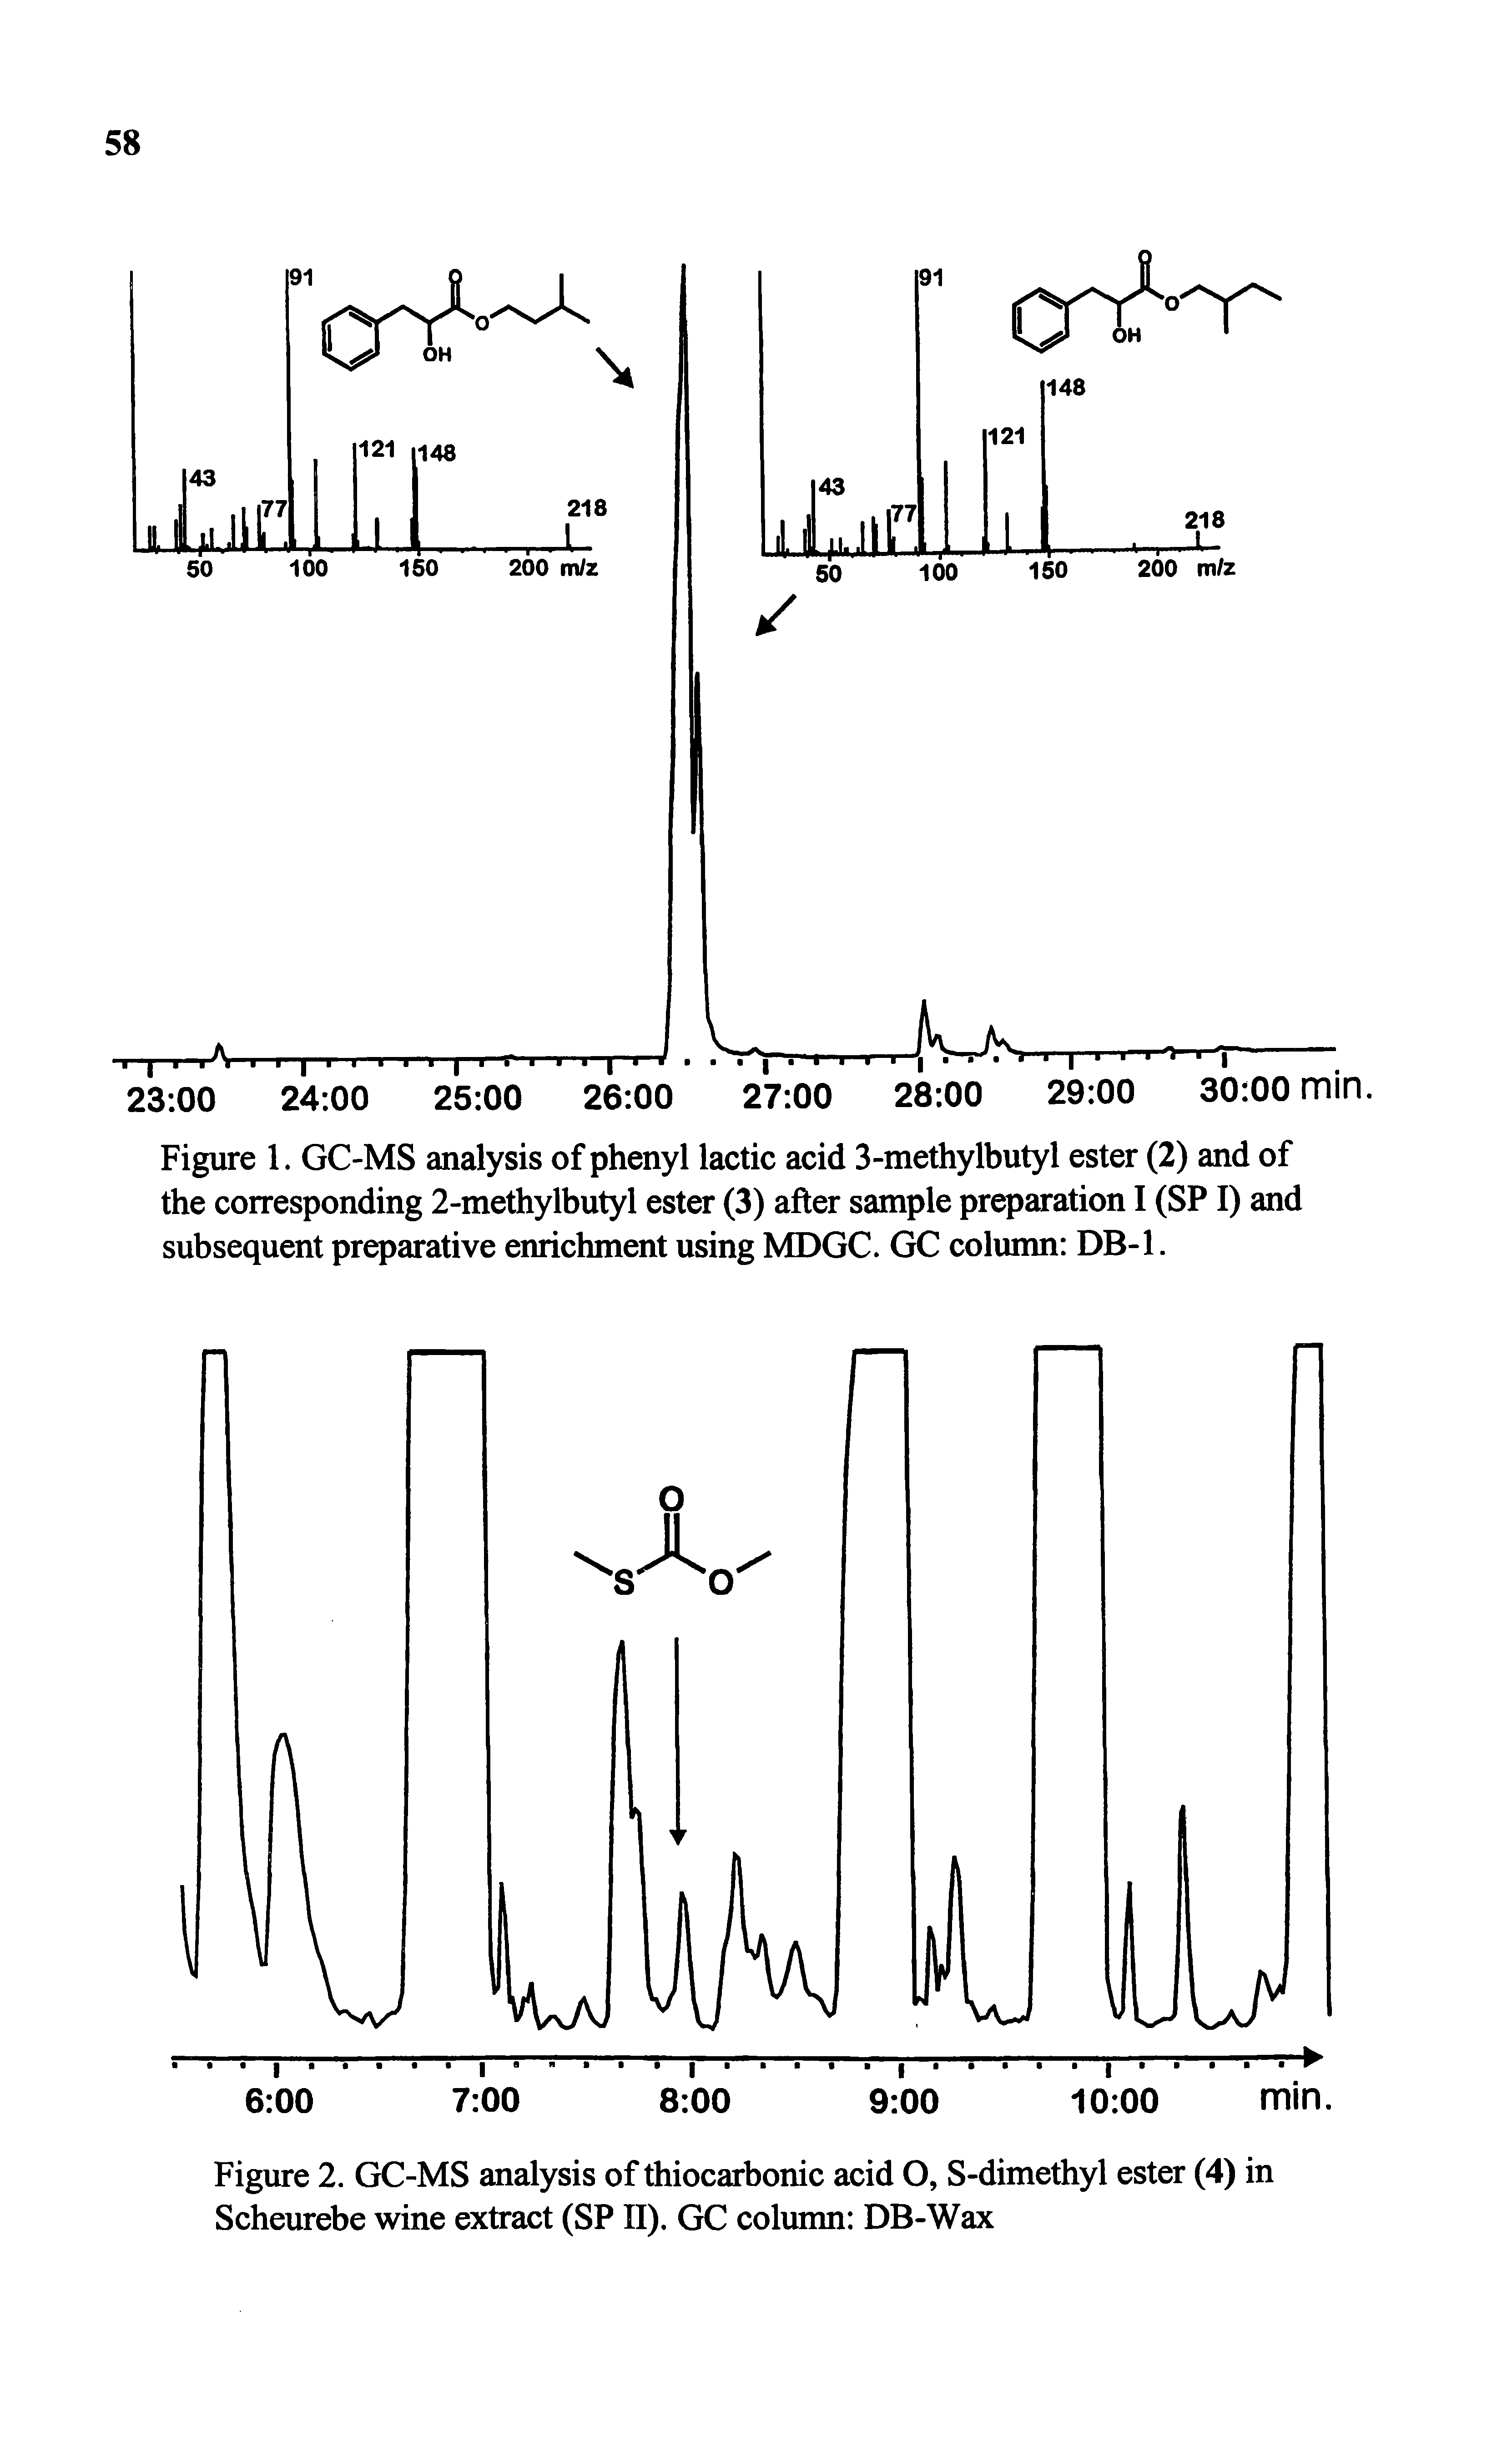 Figure 1. GC-MS analysis of phenyl lactic acid 3-methylbutyl ester (2) and of the corresponding 2-methylbutyl ester (3) after sample preparation I (SP I) and subsequent preparative enrichment using MDGC. GC column DB-1.